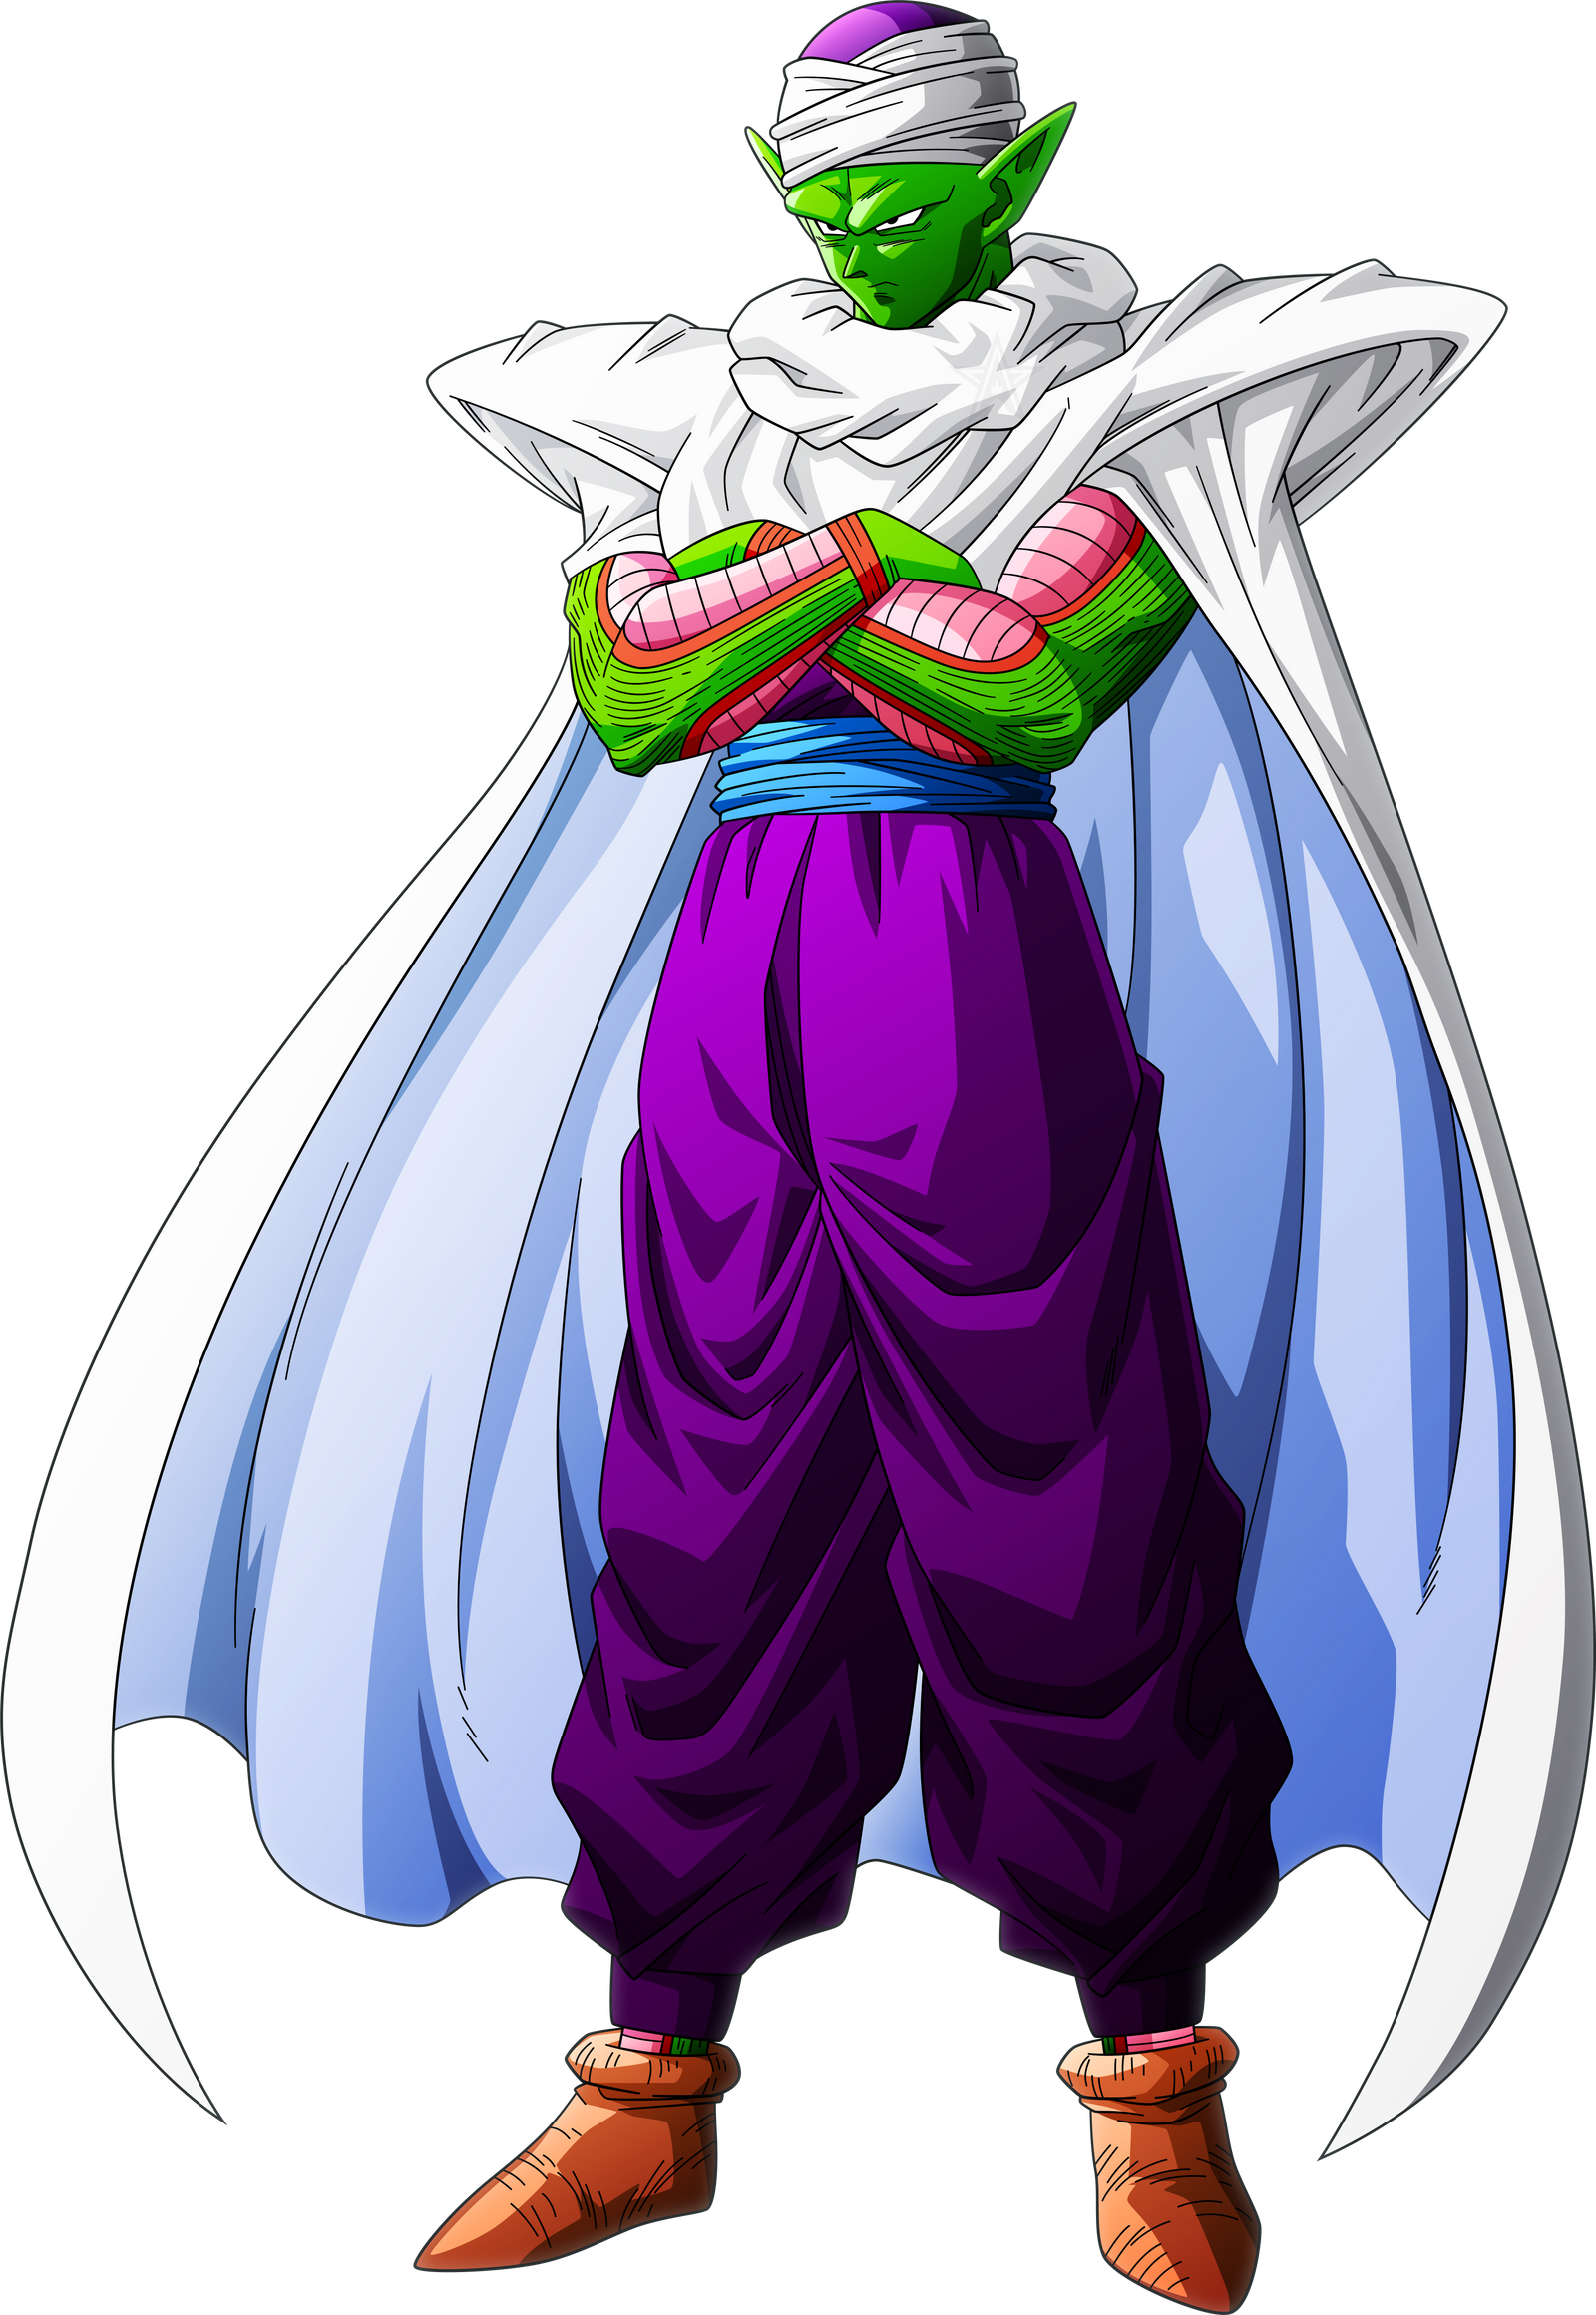 piccolo__1_by_aubreiprince-dbadhfh.png